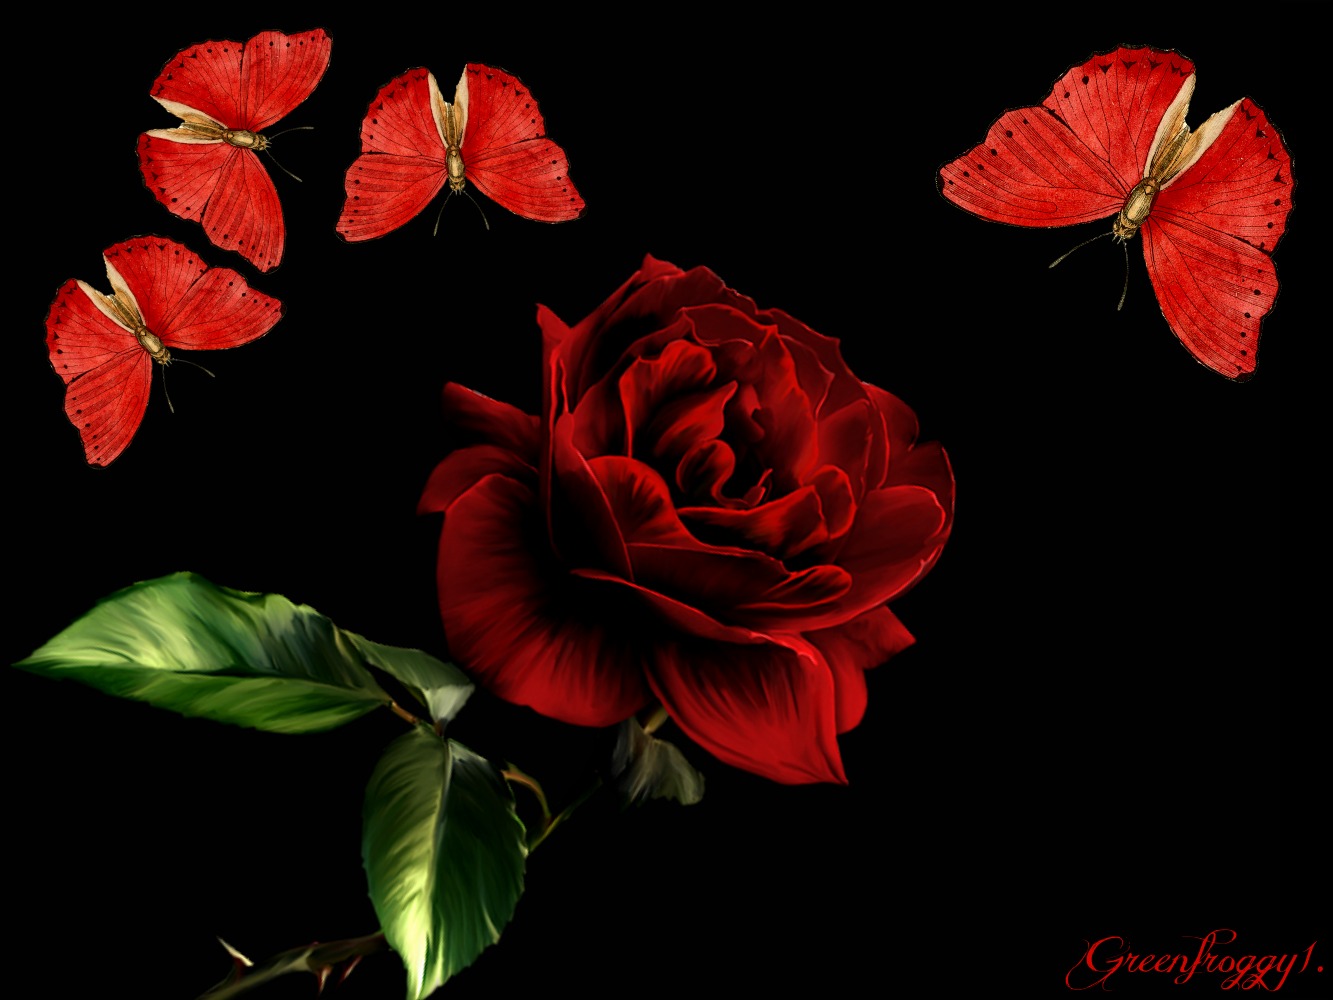 RED BUTTERFLIES WITH ROSE by GREENFROGGY1